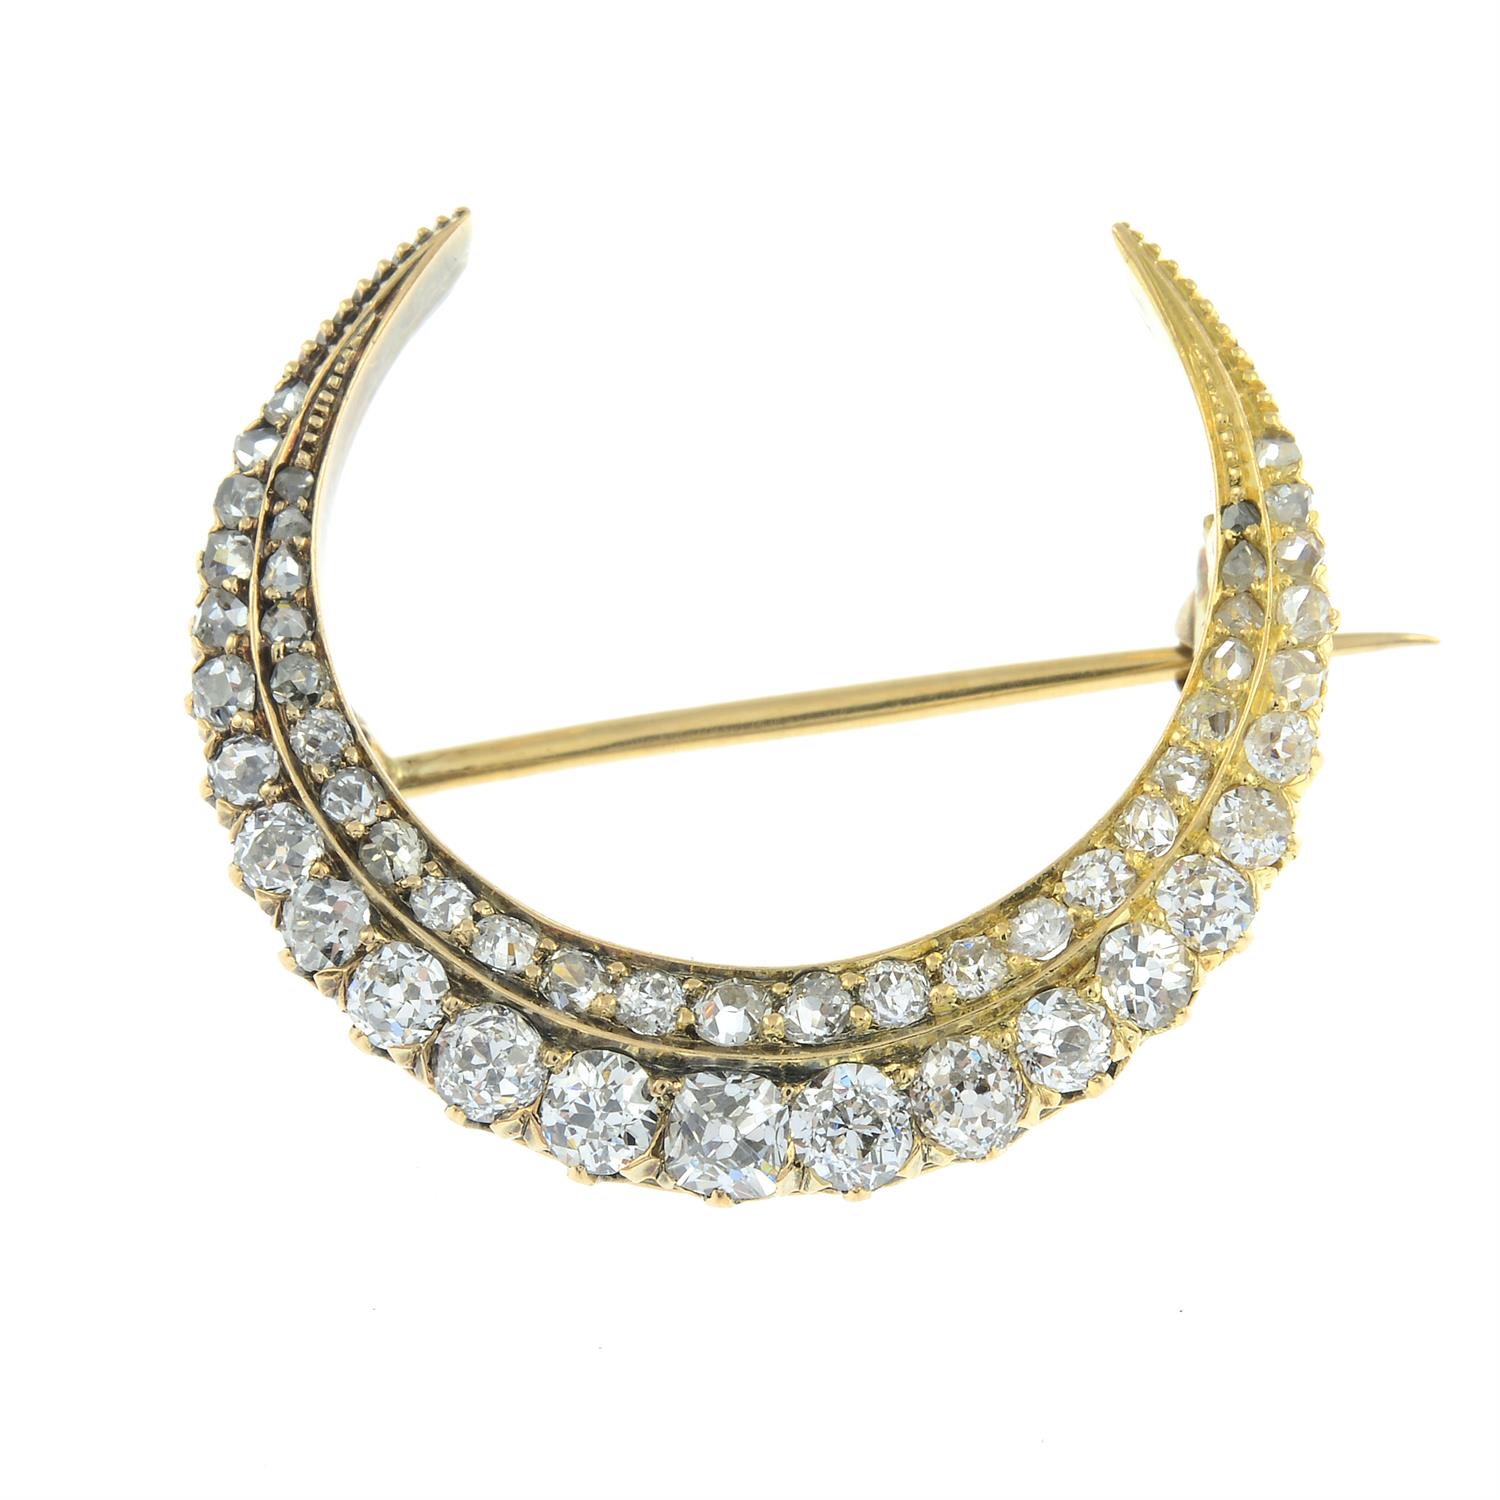 An early 20th century 18ct gold old and rose-cut diamond crescent brooch. - Image 2 of 4